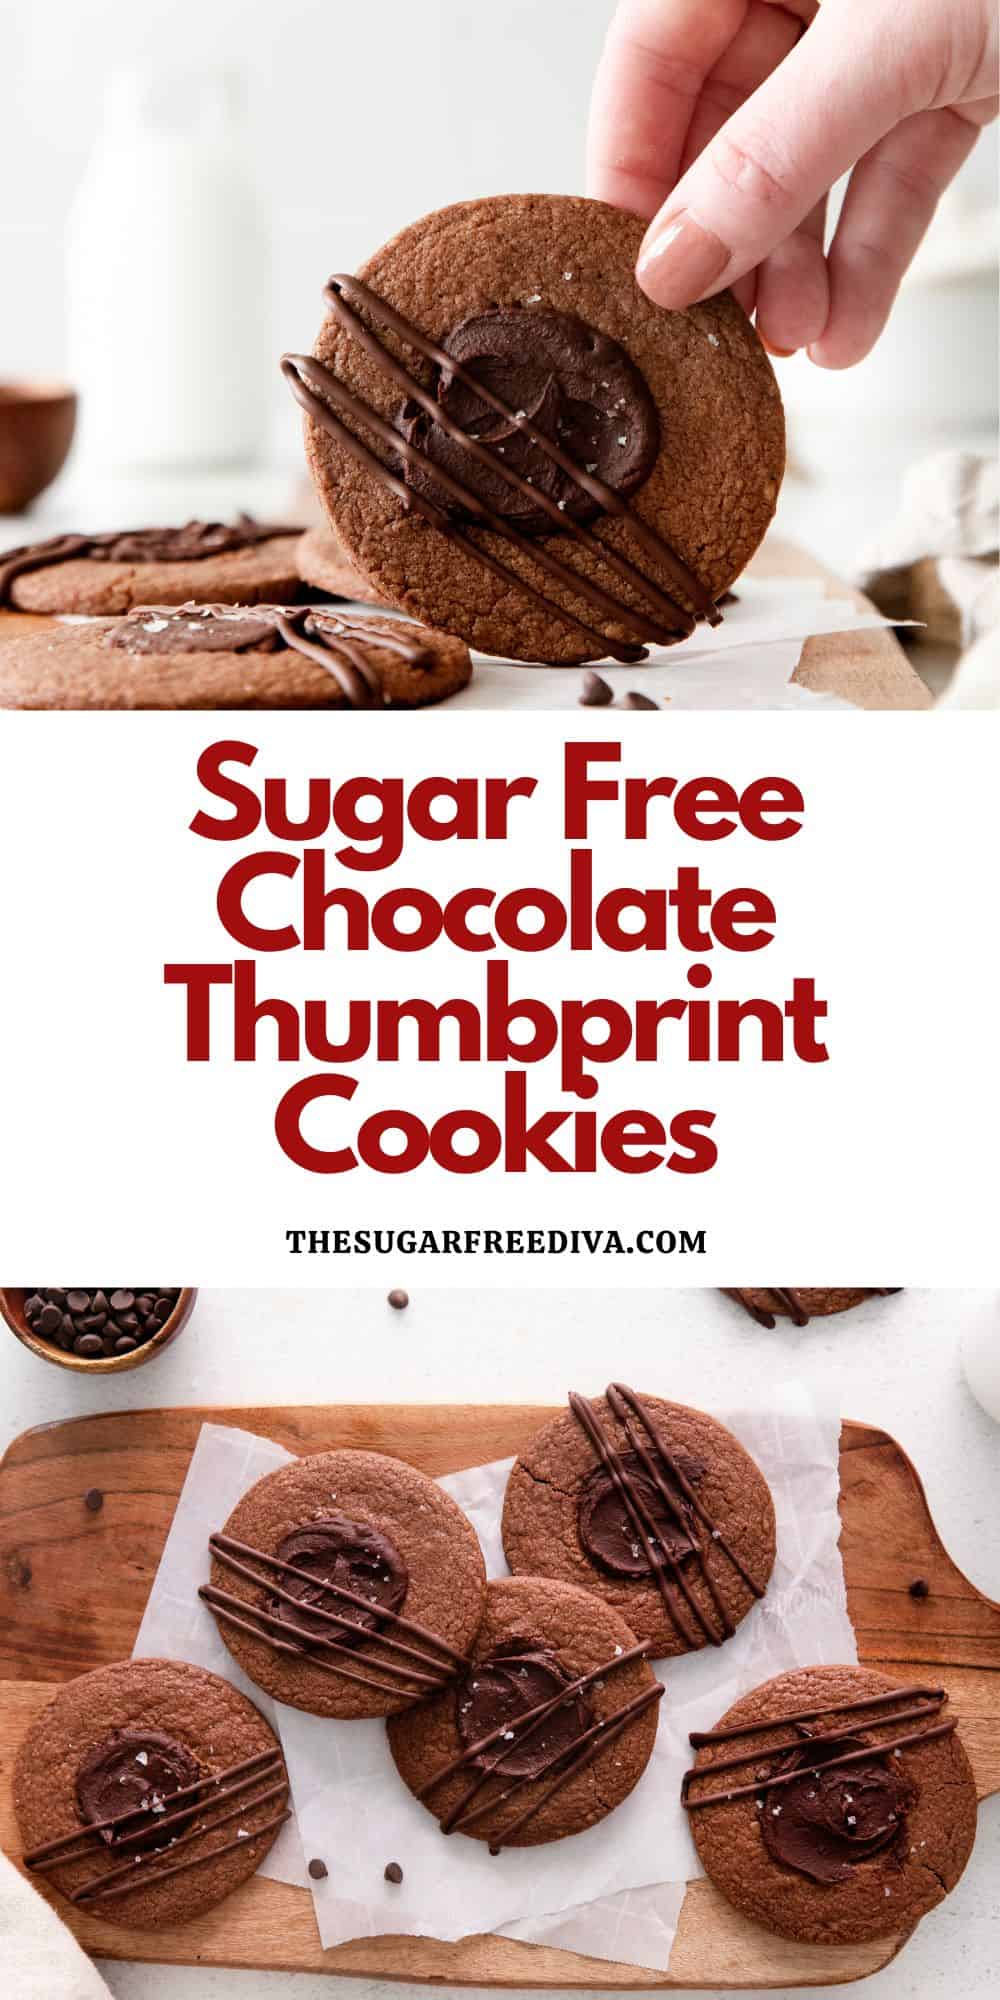 Sugar Free Chocolate Thumbprint Cookies, a simple dessert or snack recipe for a crispy eggless cookie with a ganache topping.